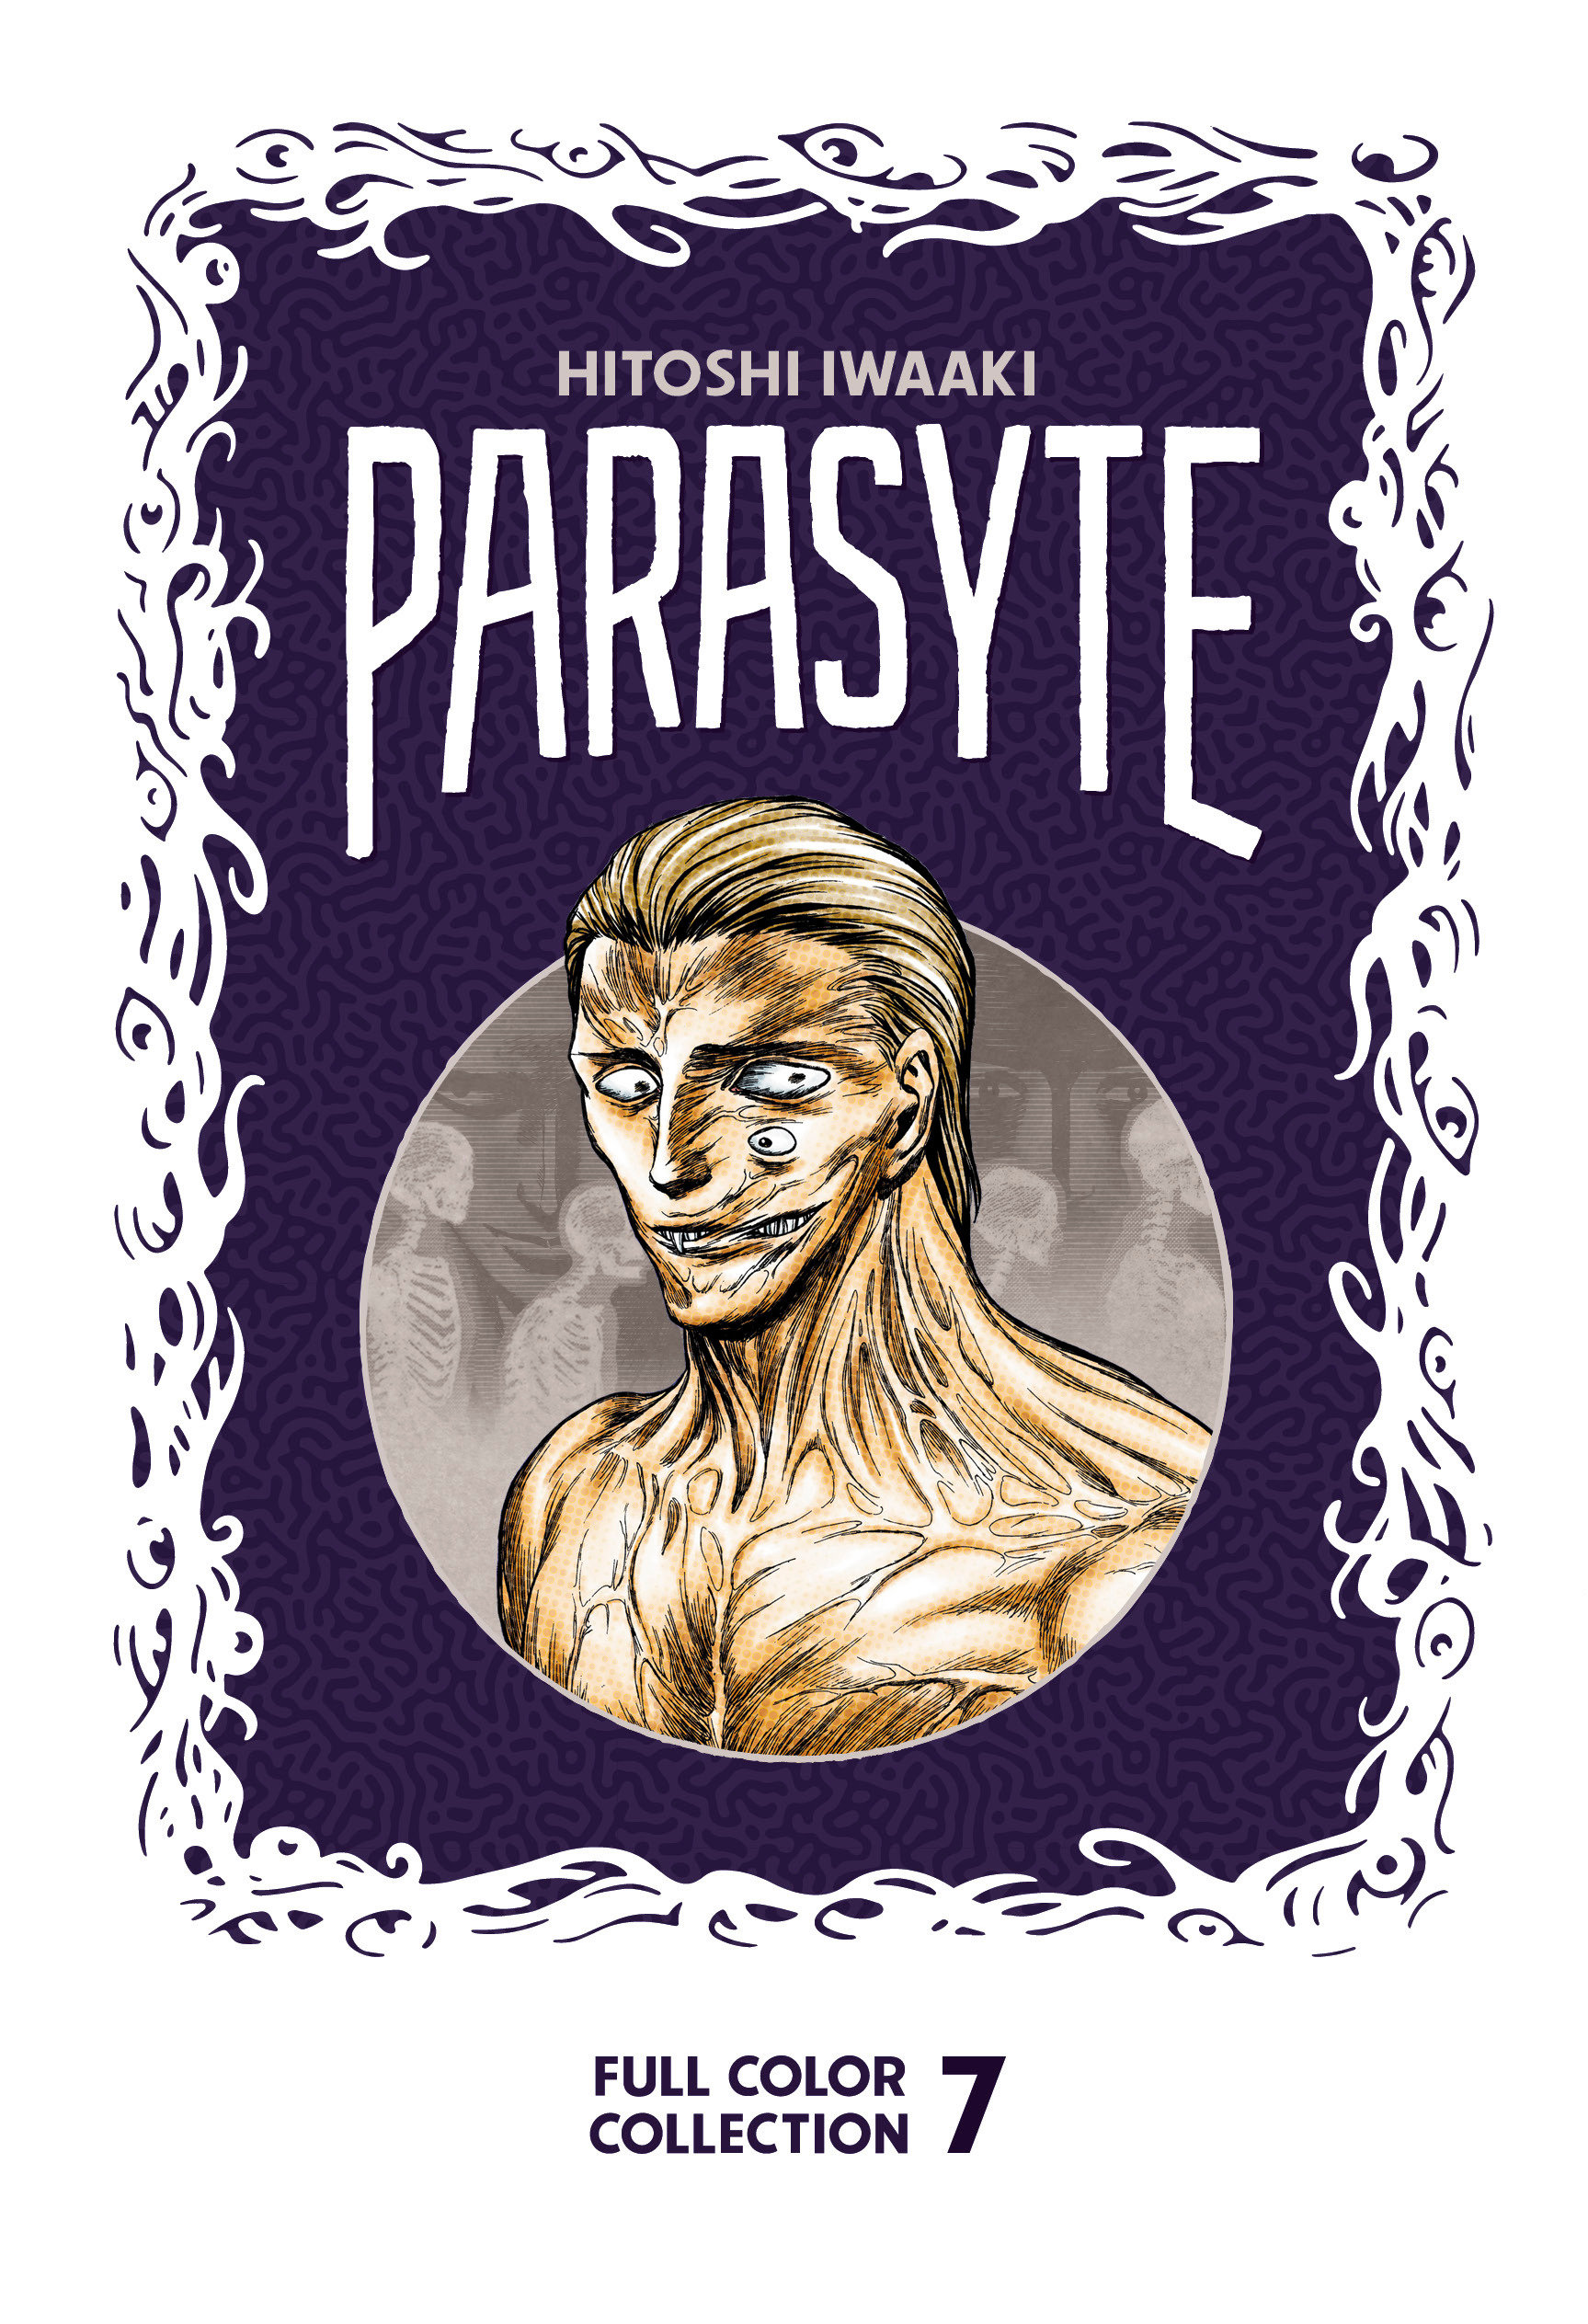 Parasyte Full Color Collection Manga Hardcover 7